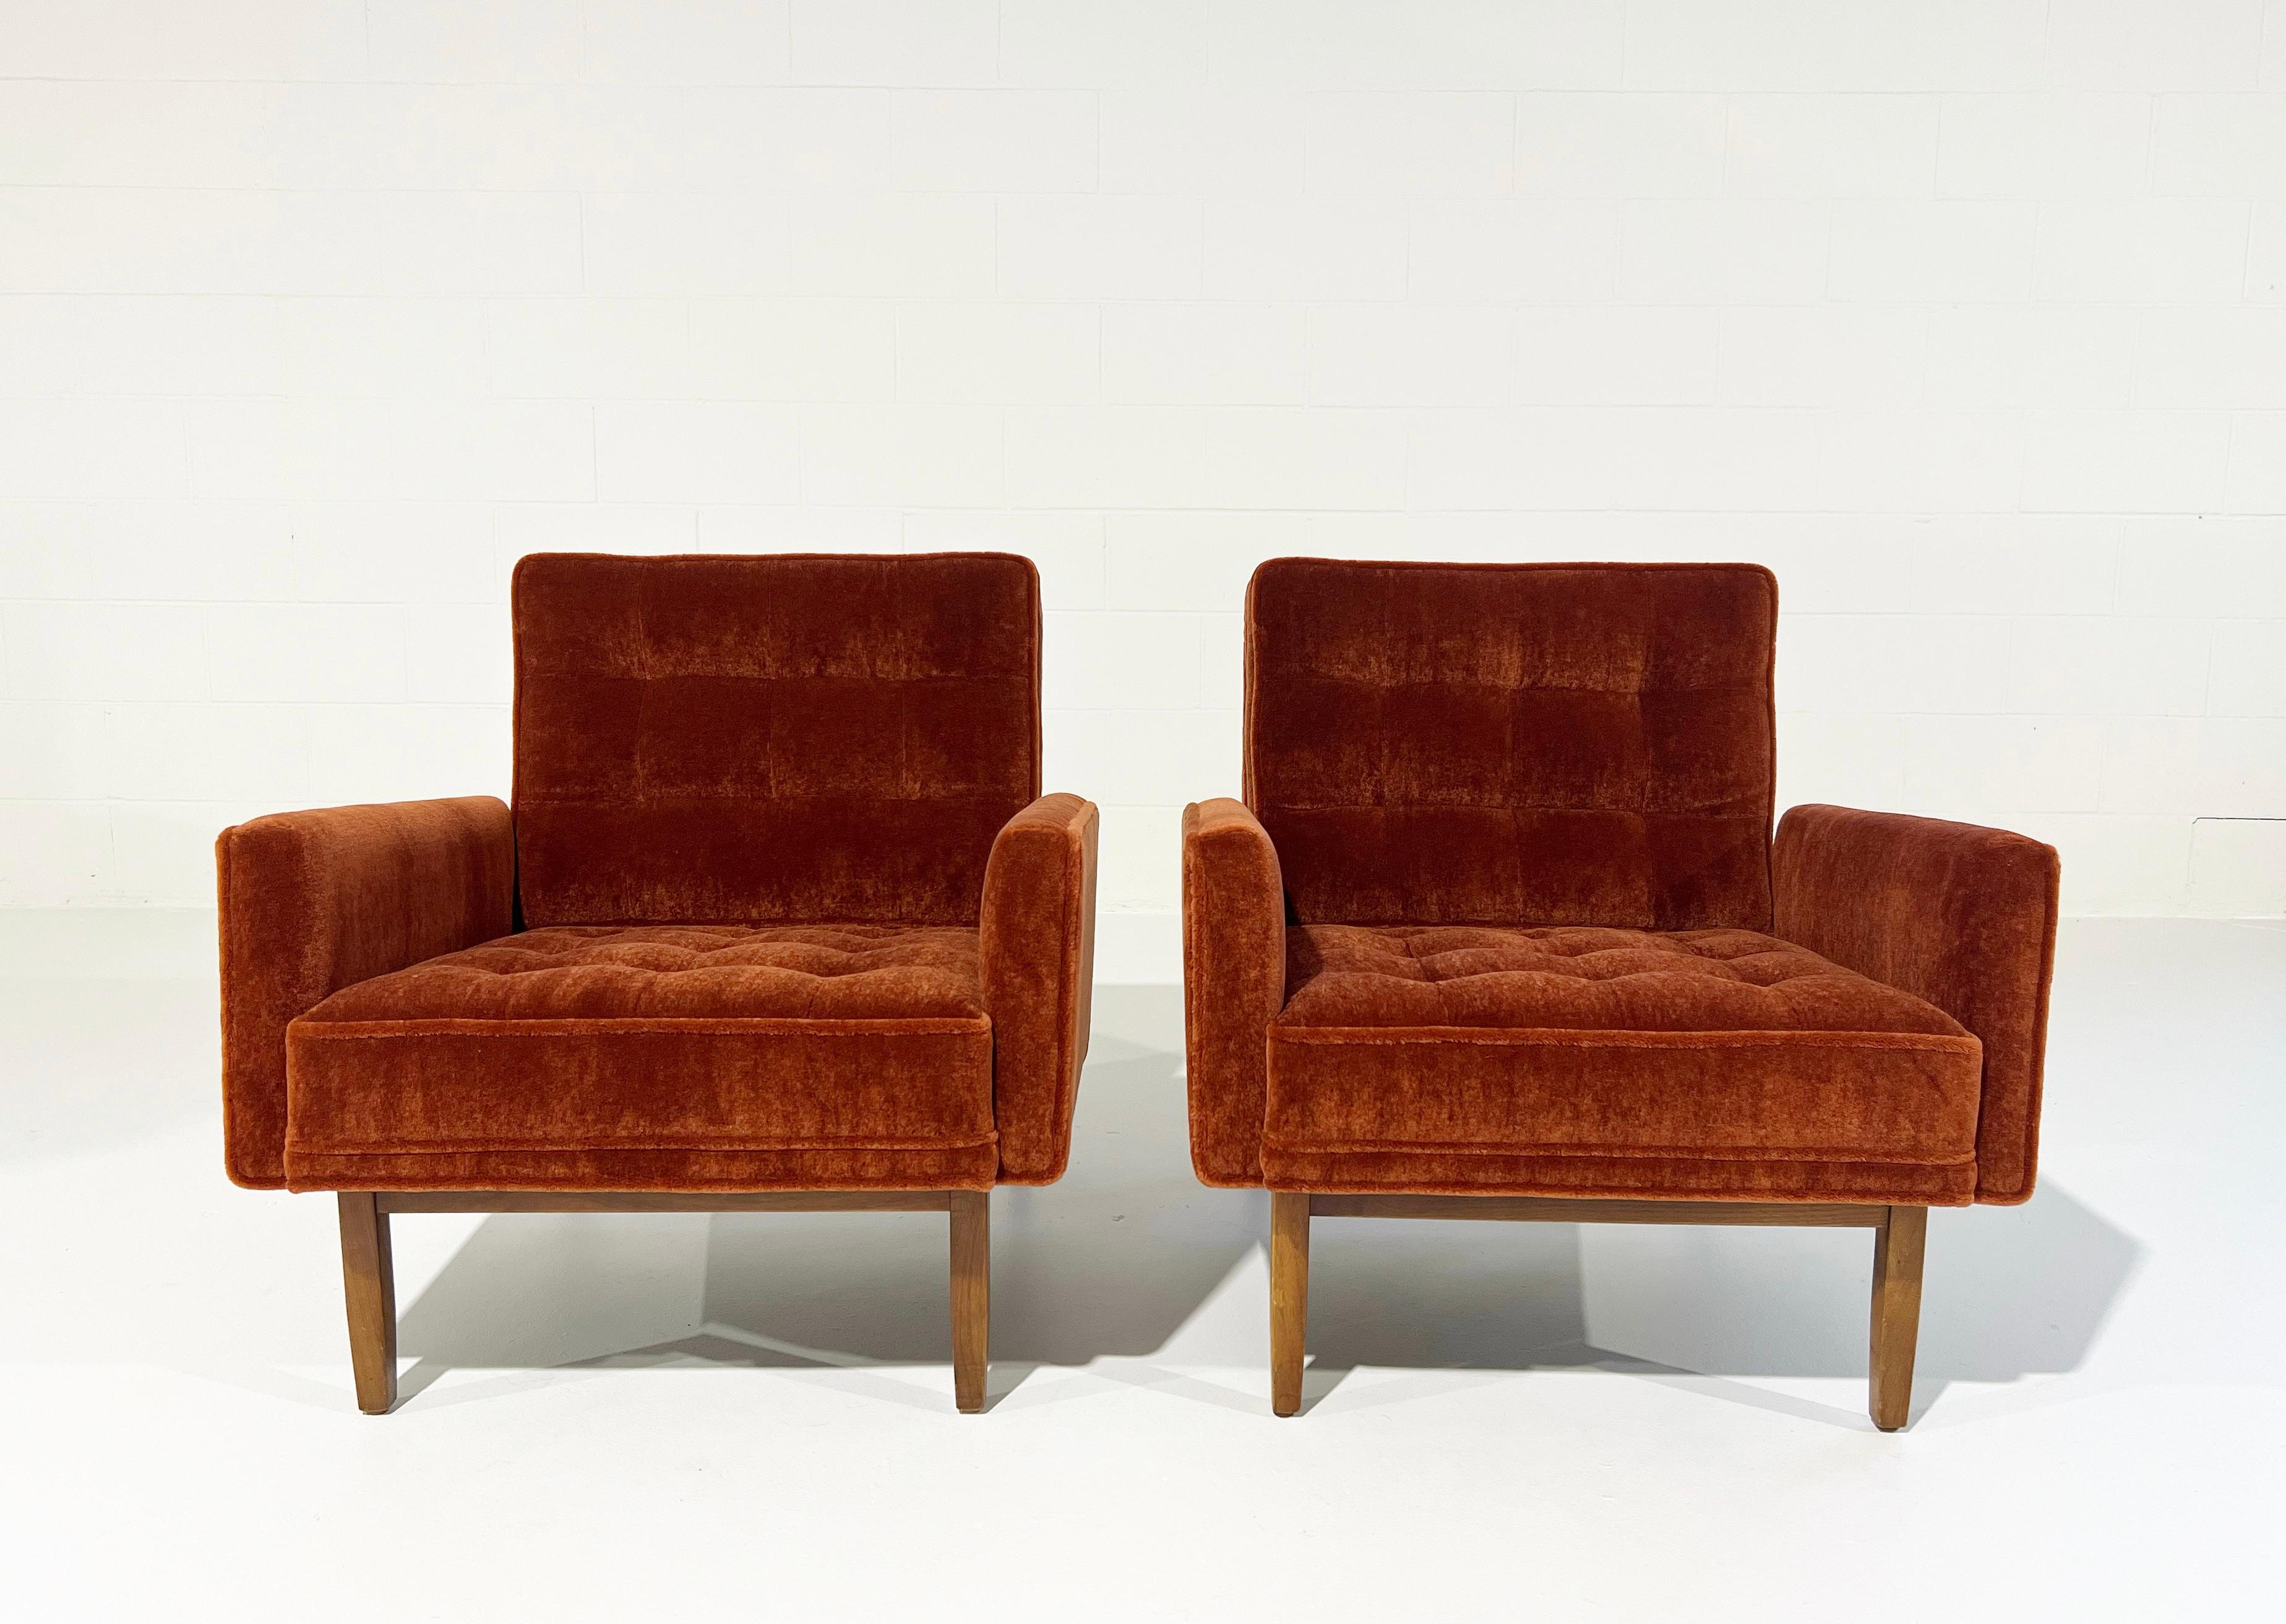 Mid-Century Modern Vintage Restored Florence Knoll Armchairs in Pierre Frey Teddy Mohair For Sale